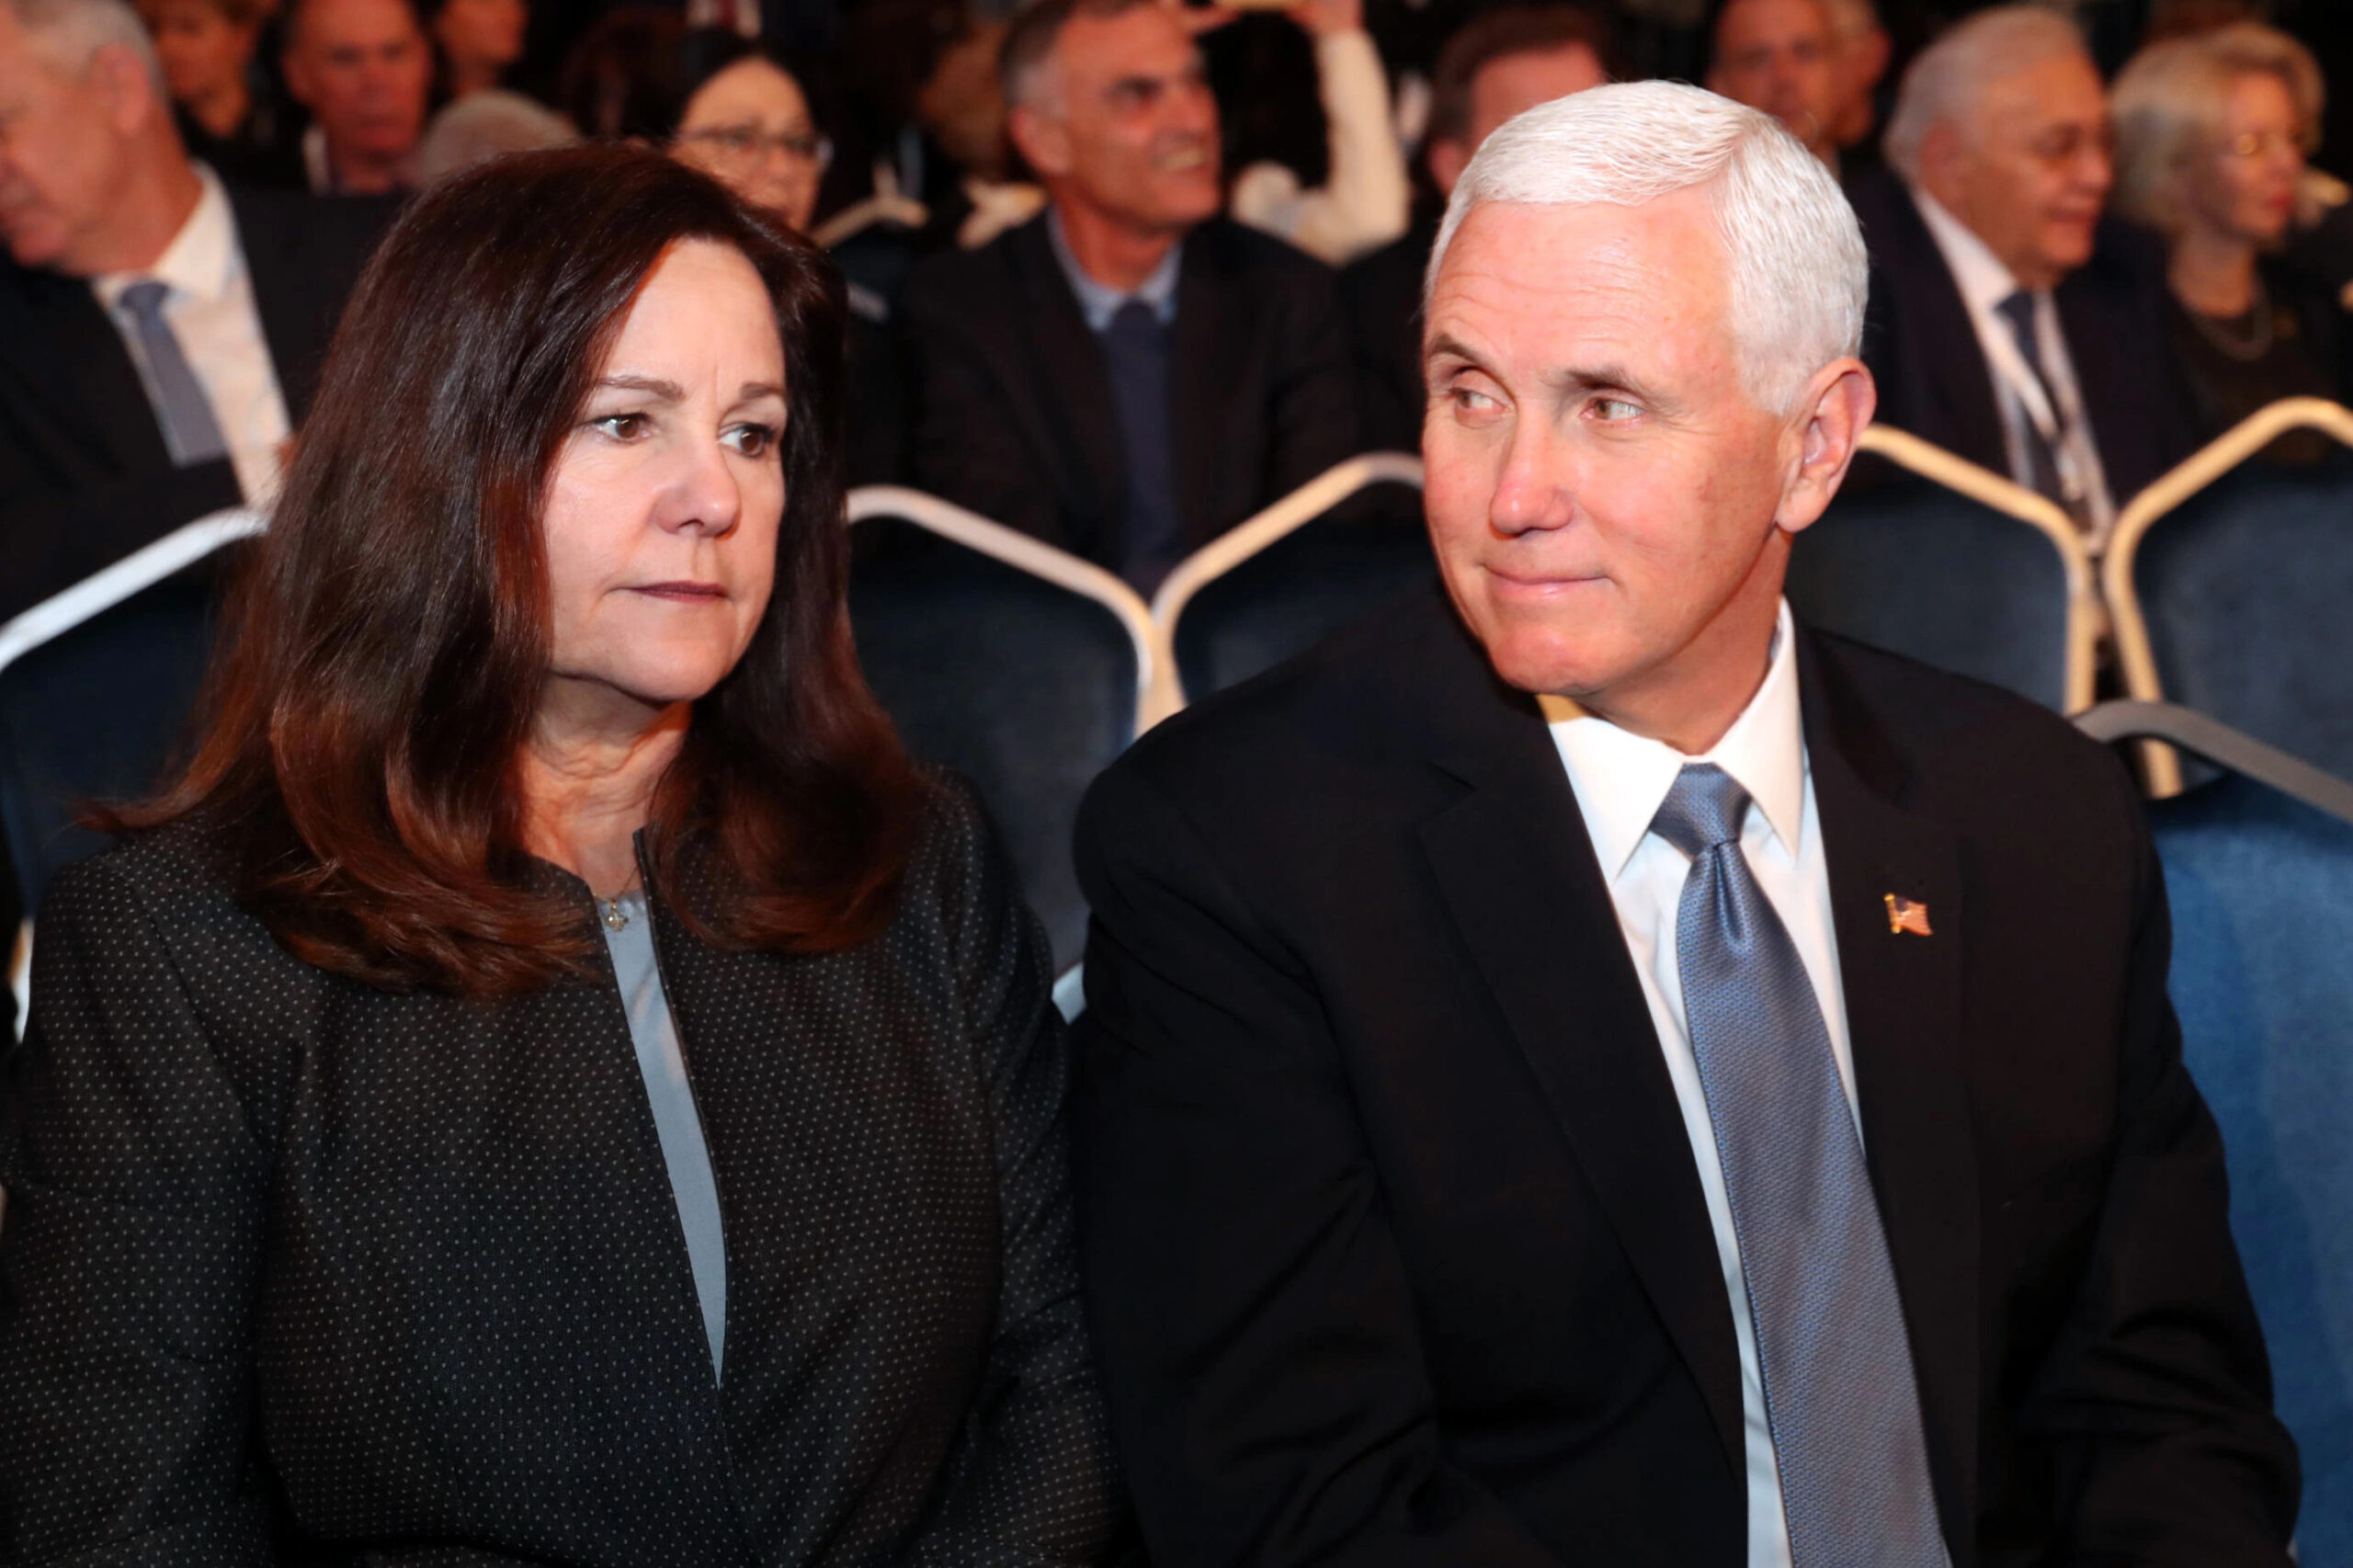 MIKE AND KAREN PENCE NET WORTH